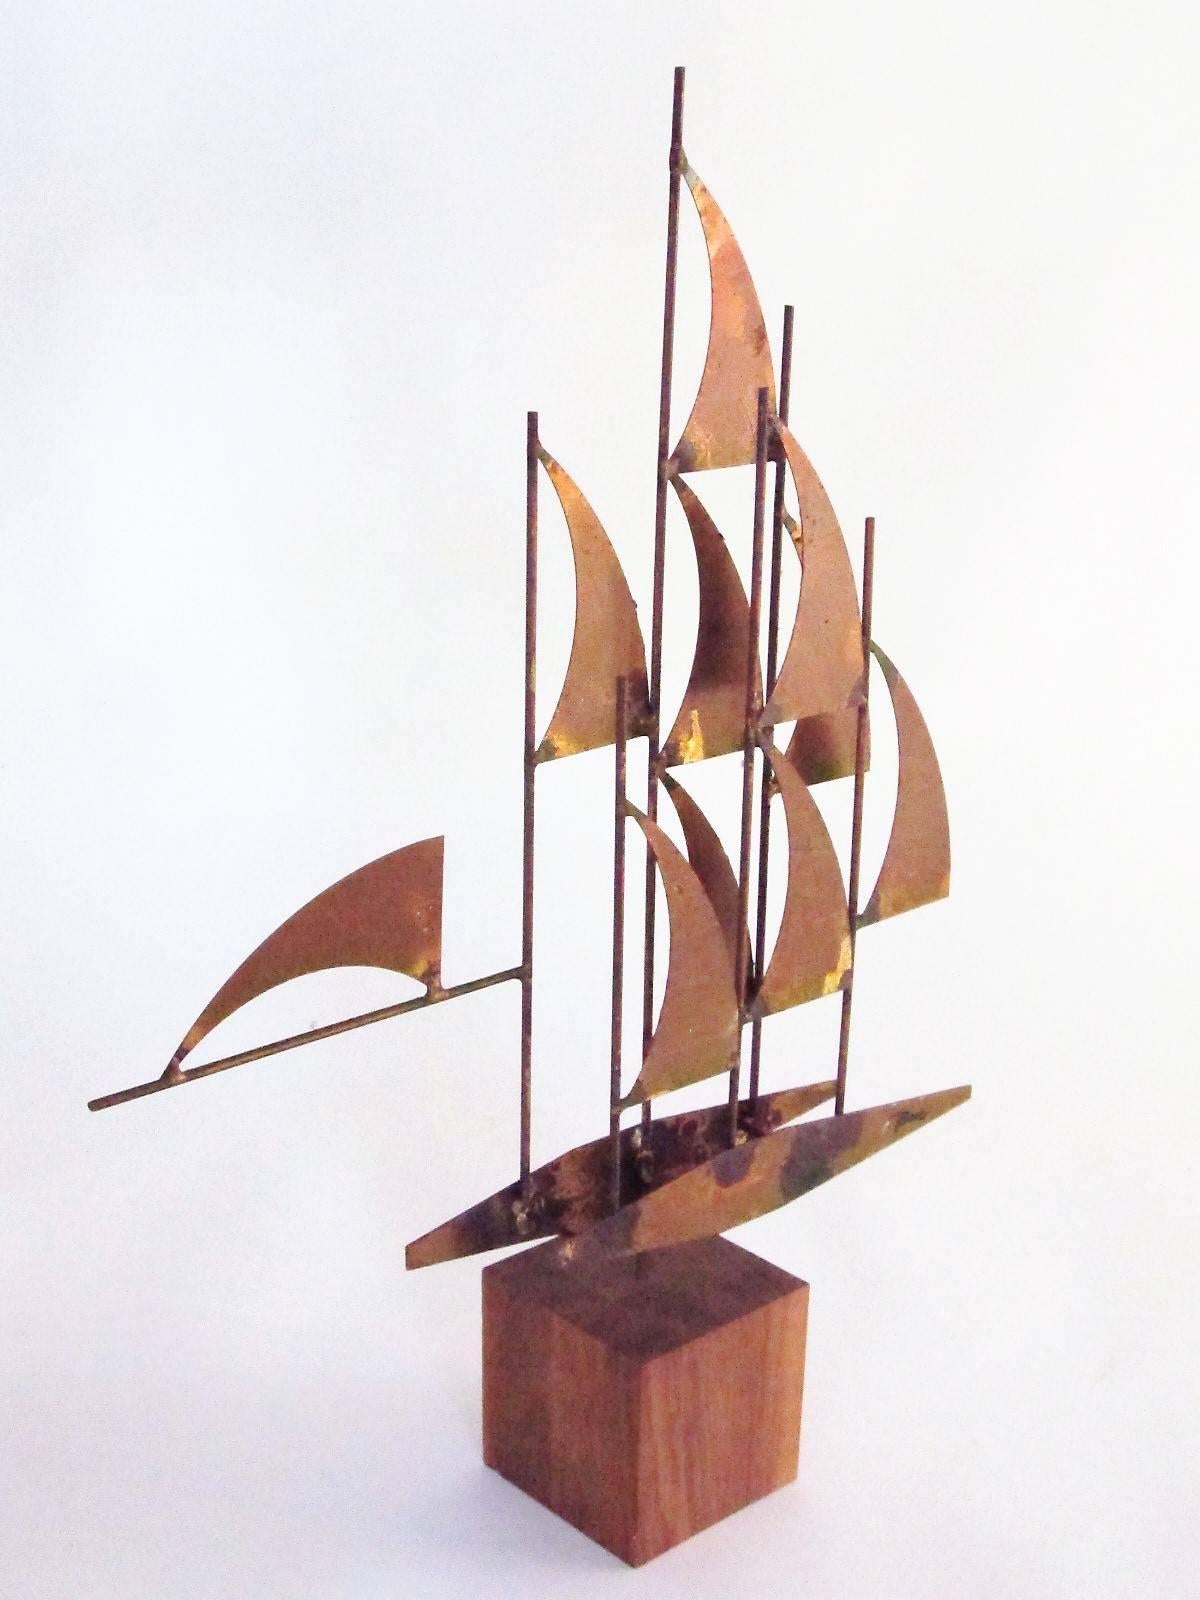 More common wall sculptures are to be found by this artist, William Bowie. But this variation is made as a table or desk sculpture. 

The base is a 3.25